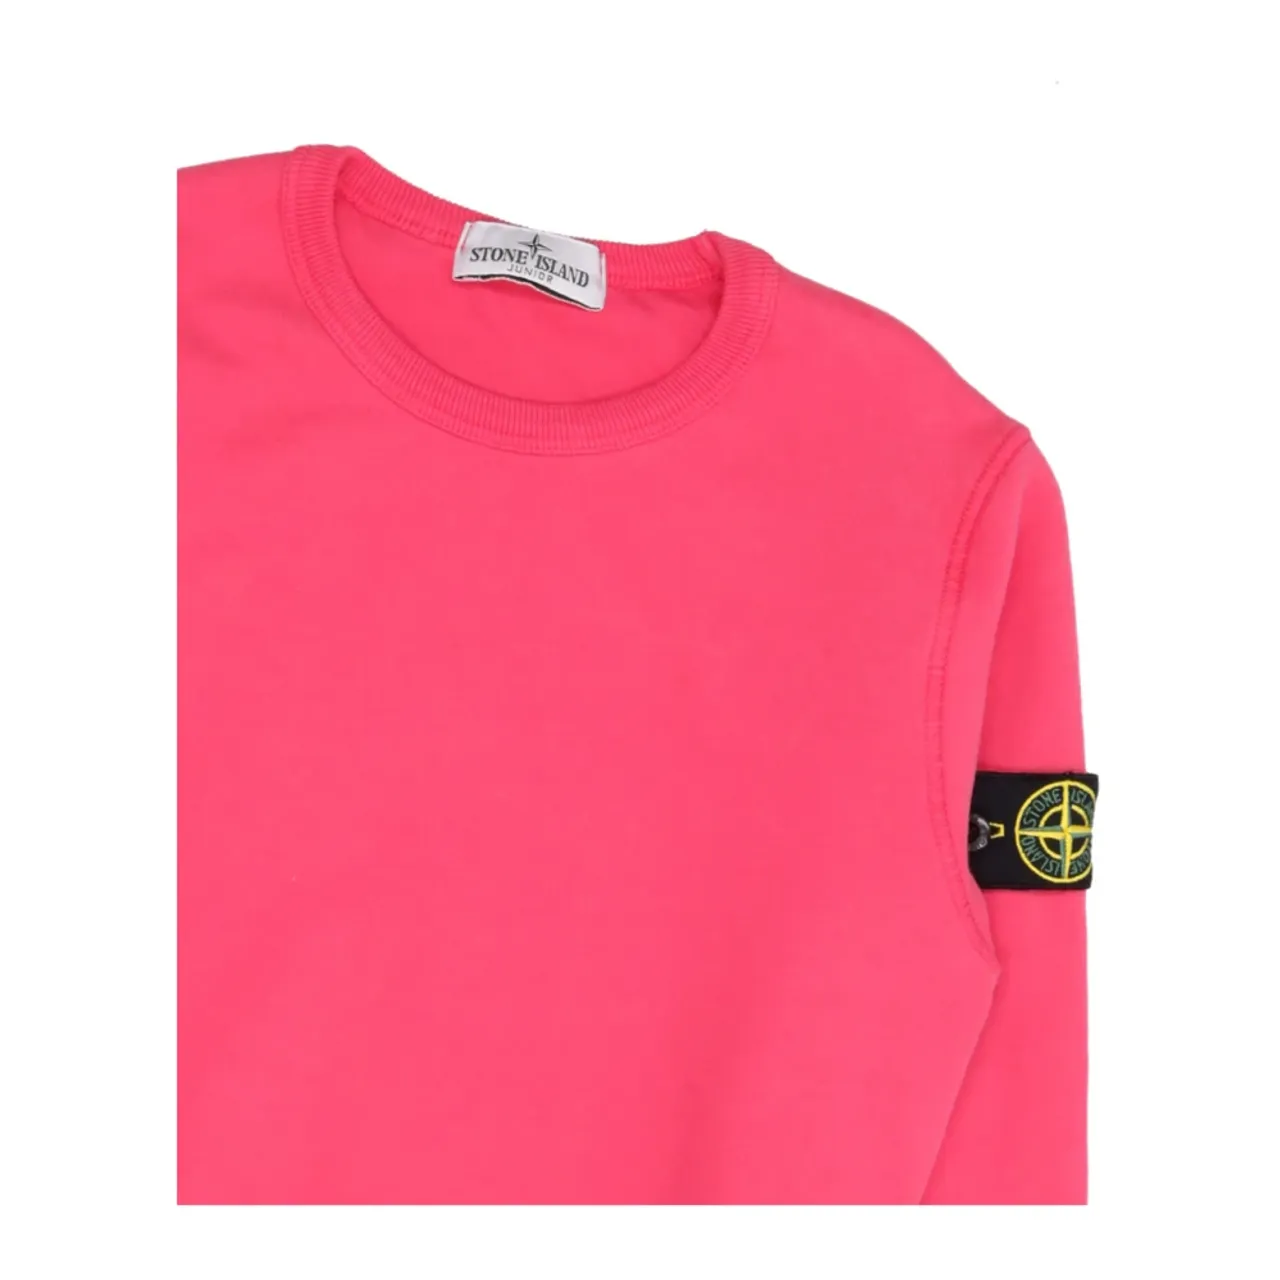 Stone Island , Red Cotton Sweatshirt with Logo Patch ,Pink male, Sizes: